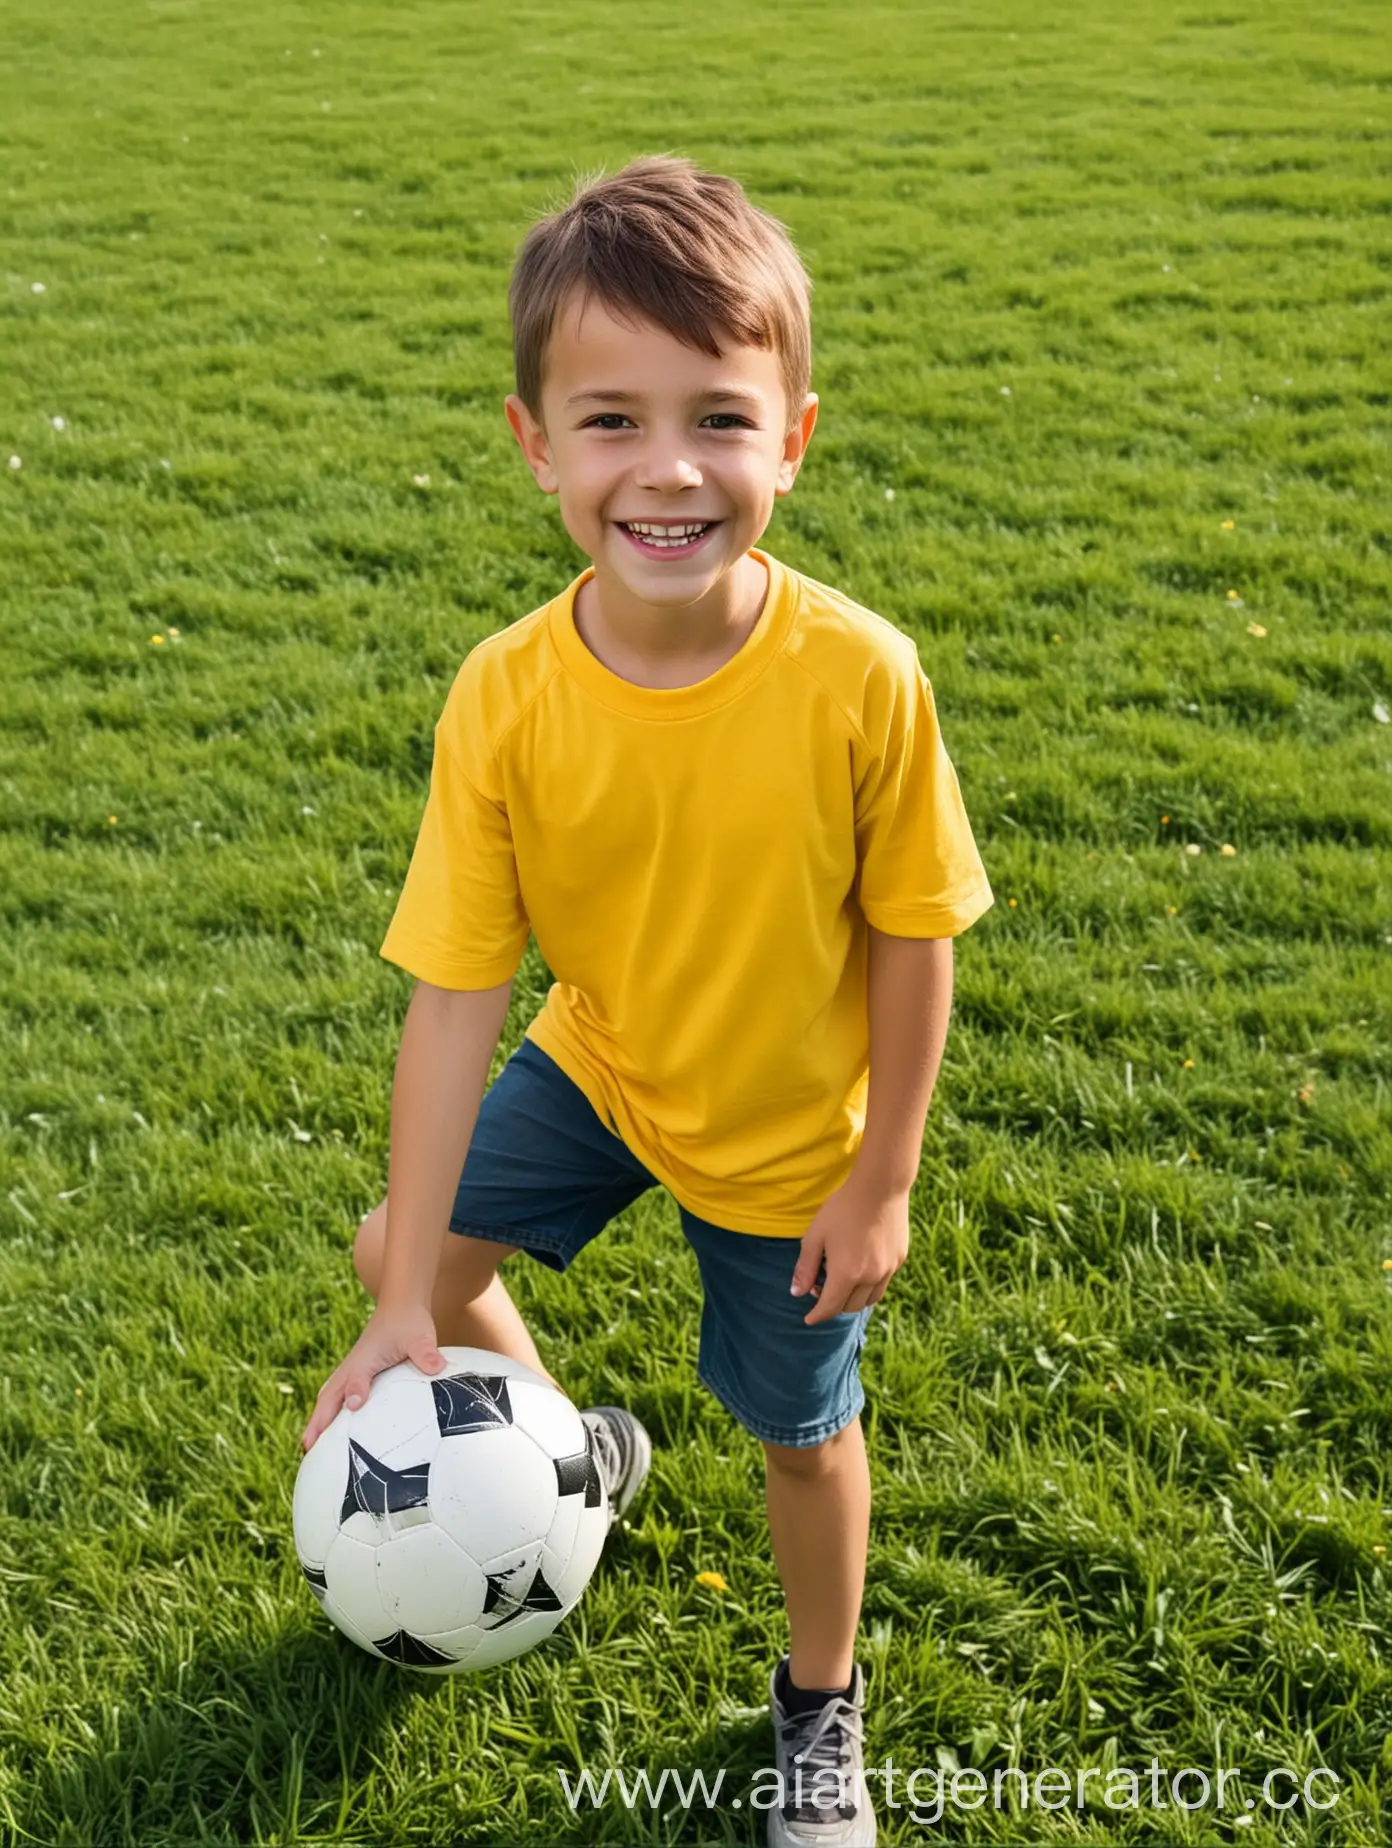 Smiling-Boy-Playing-Soccer-on-a-Sunny-Meadow